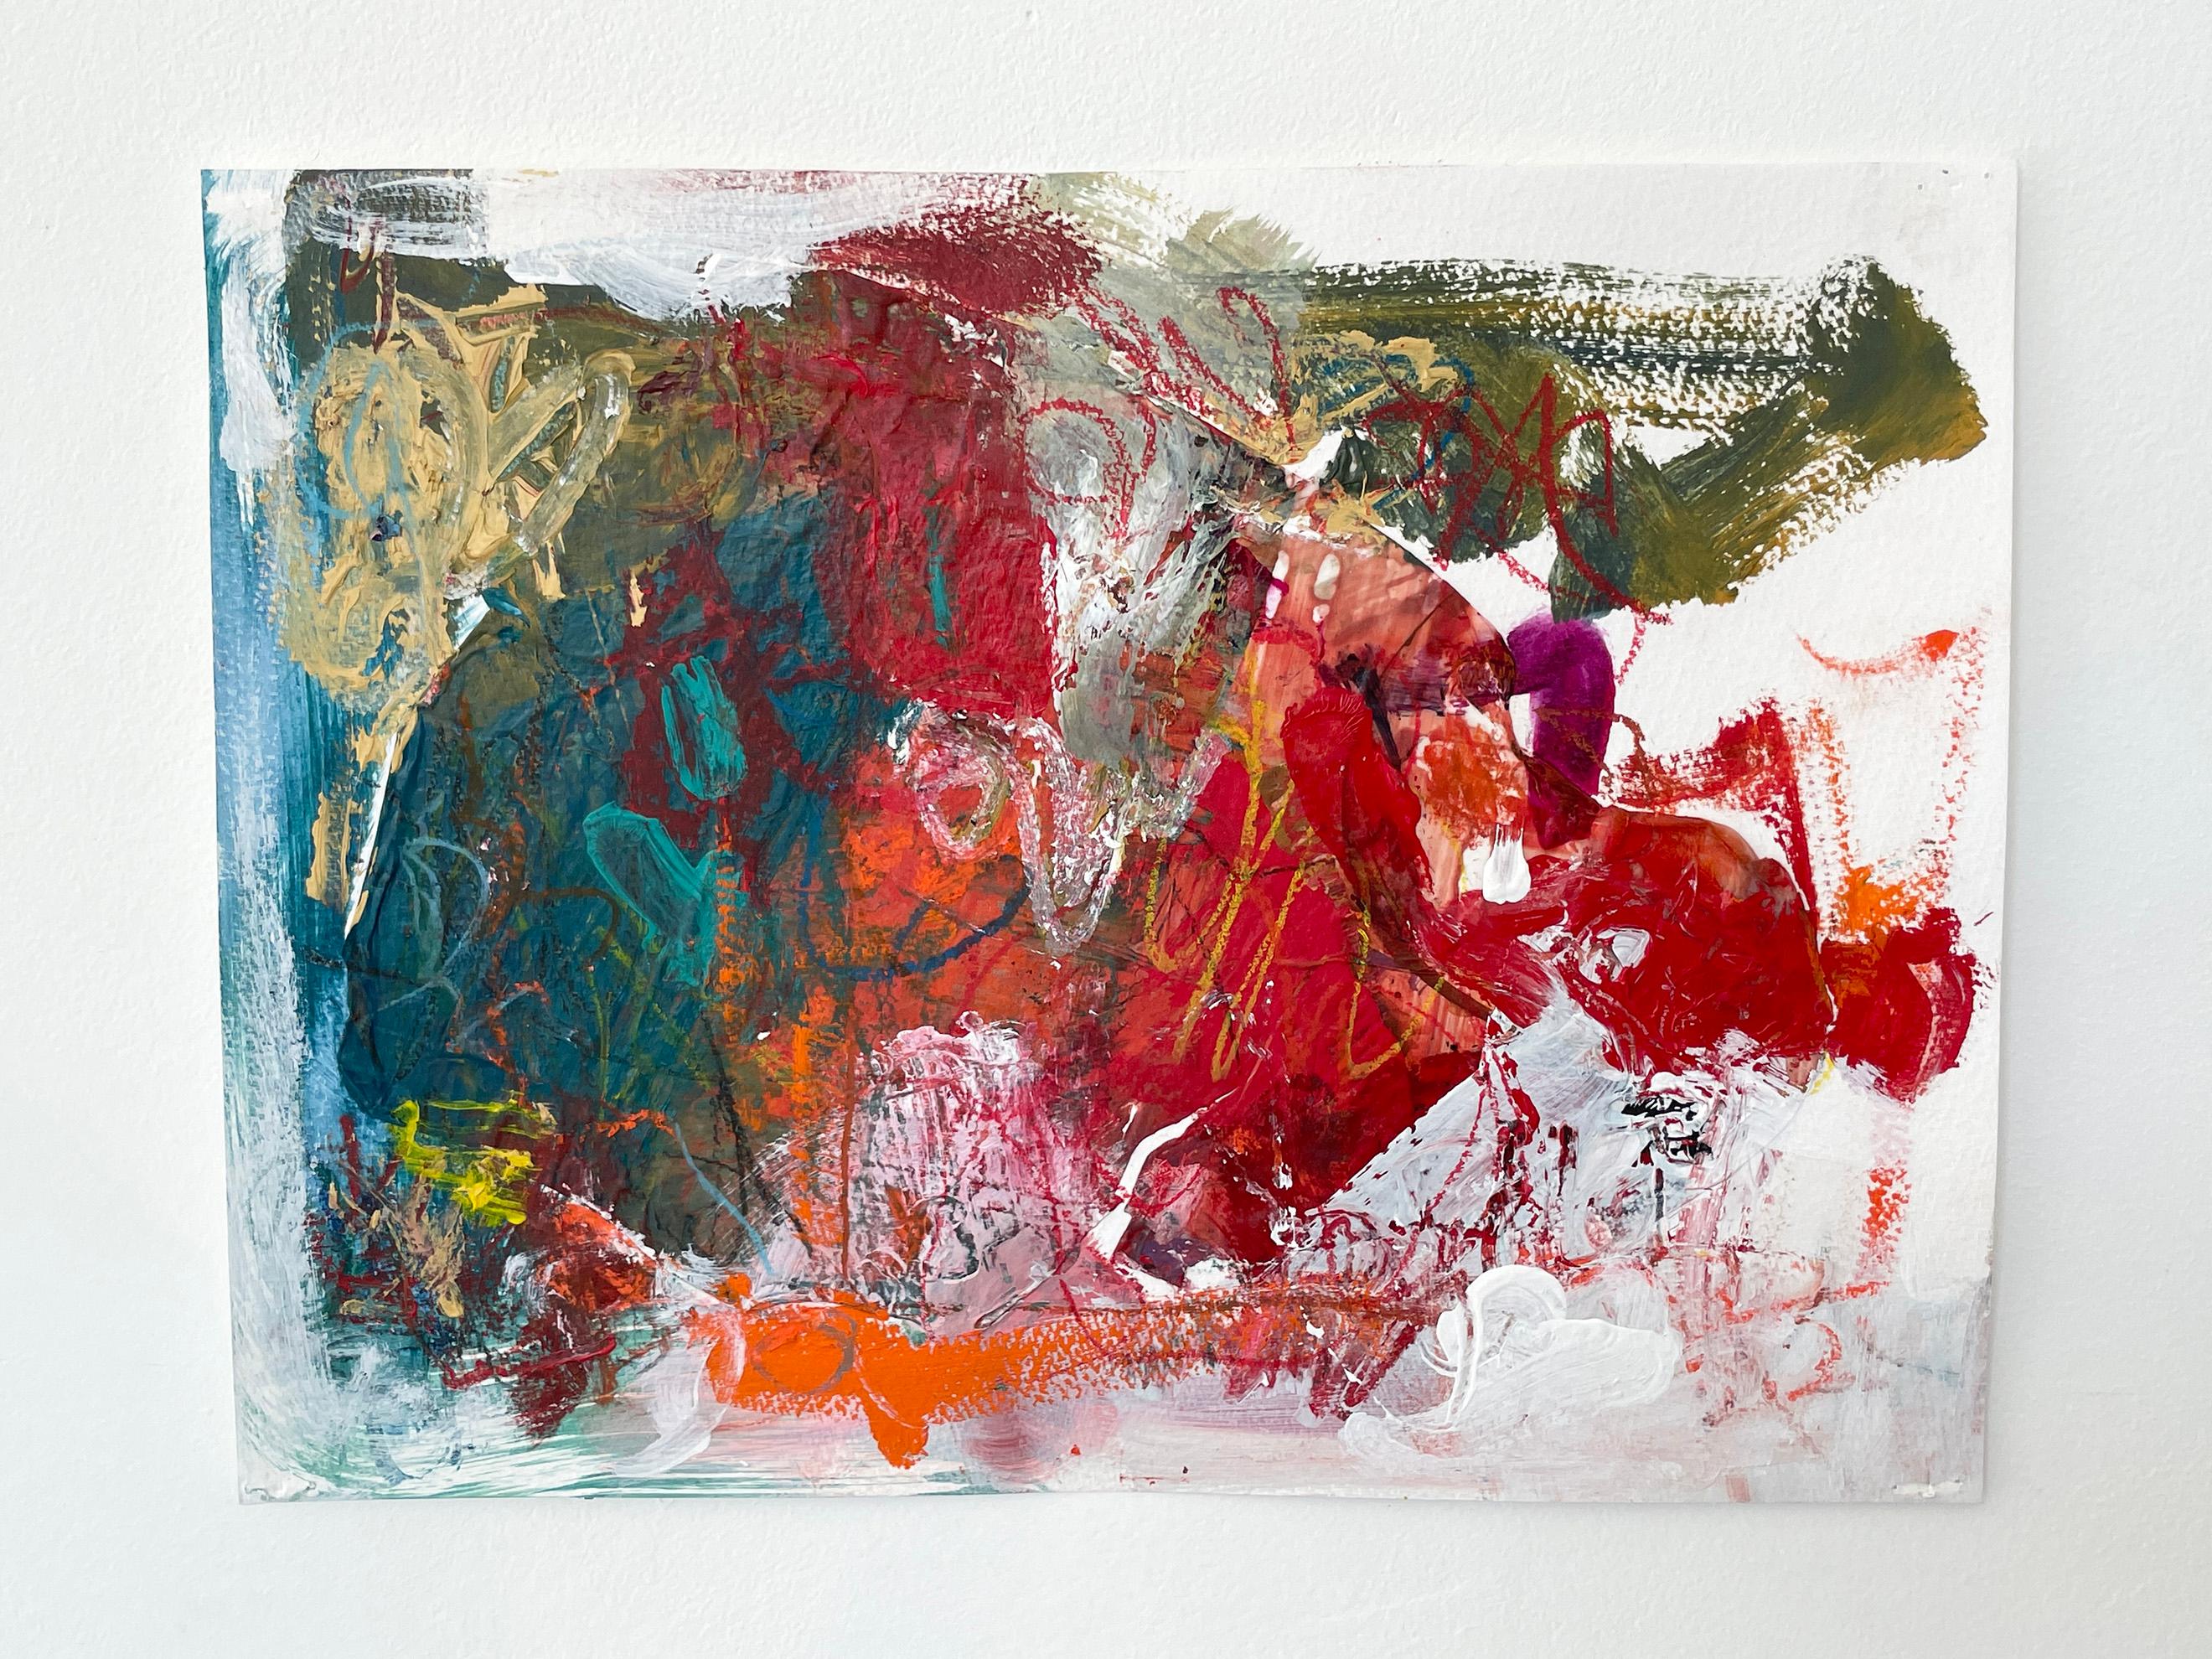 Small Works on Paper, Untitled #10 - Painting by Stephanie Visser 